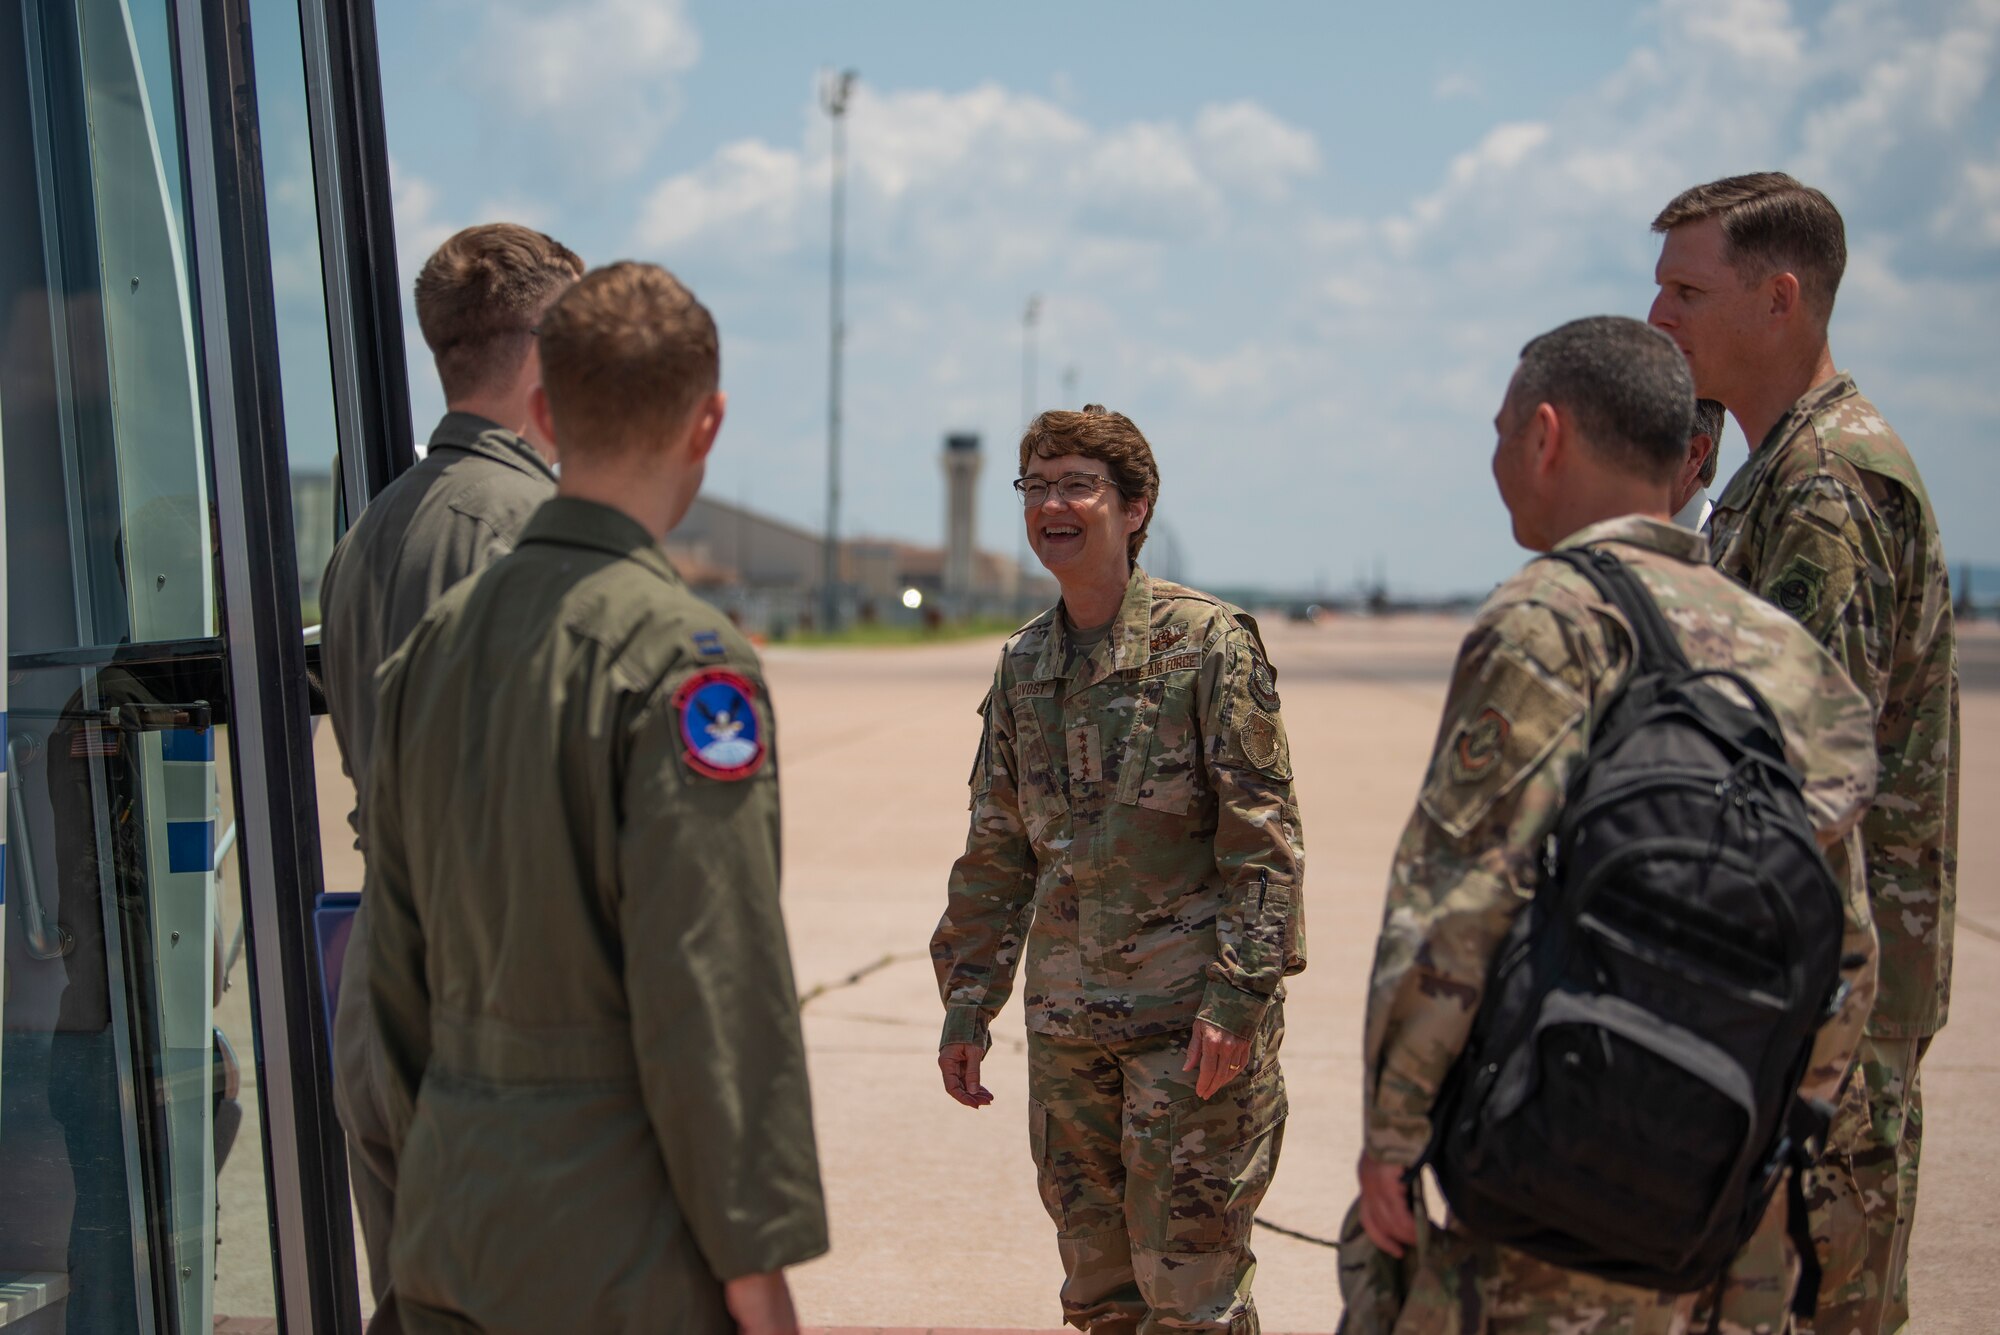 U.S. Air Force Gen. Jacqueline Van Ovost, Air Mobility Command commander, center, is greeted by Airman from the 317th Airlift Wing at Dyess Air Force Base, Texas, July 7, 2021. The AMC command team visited Dyess AFB where they met some of the Airmen accelerating the air mobility mission. (U.S. Air Force photo by Senior Airman Colin Hollowell)